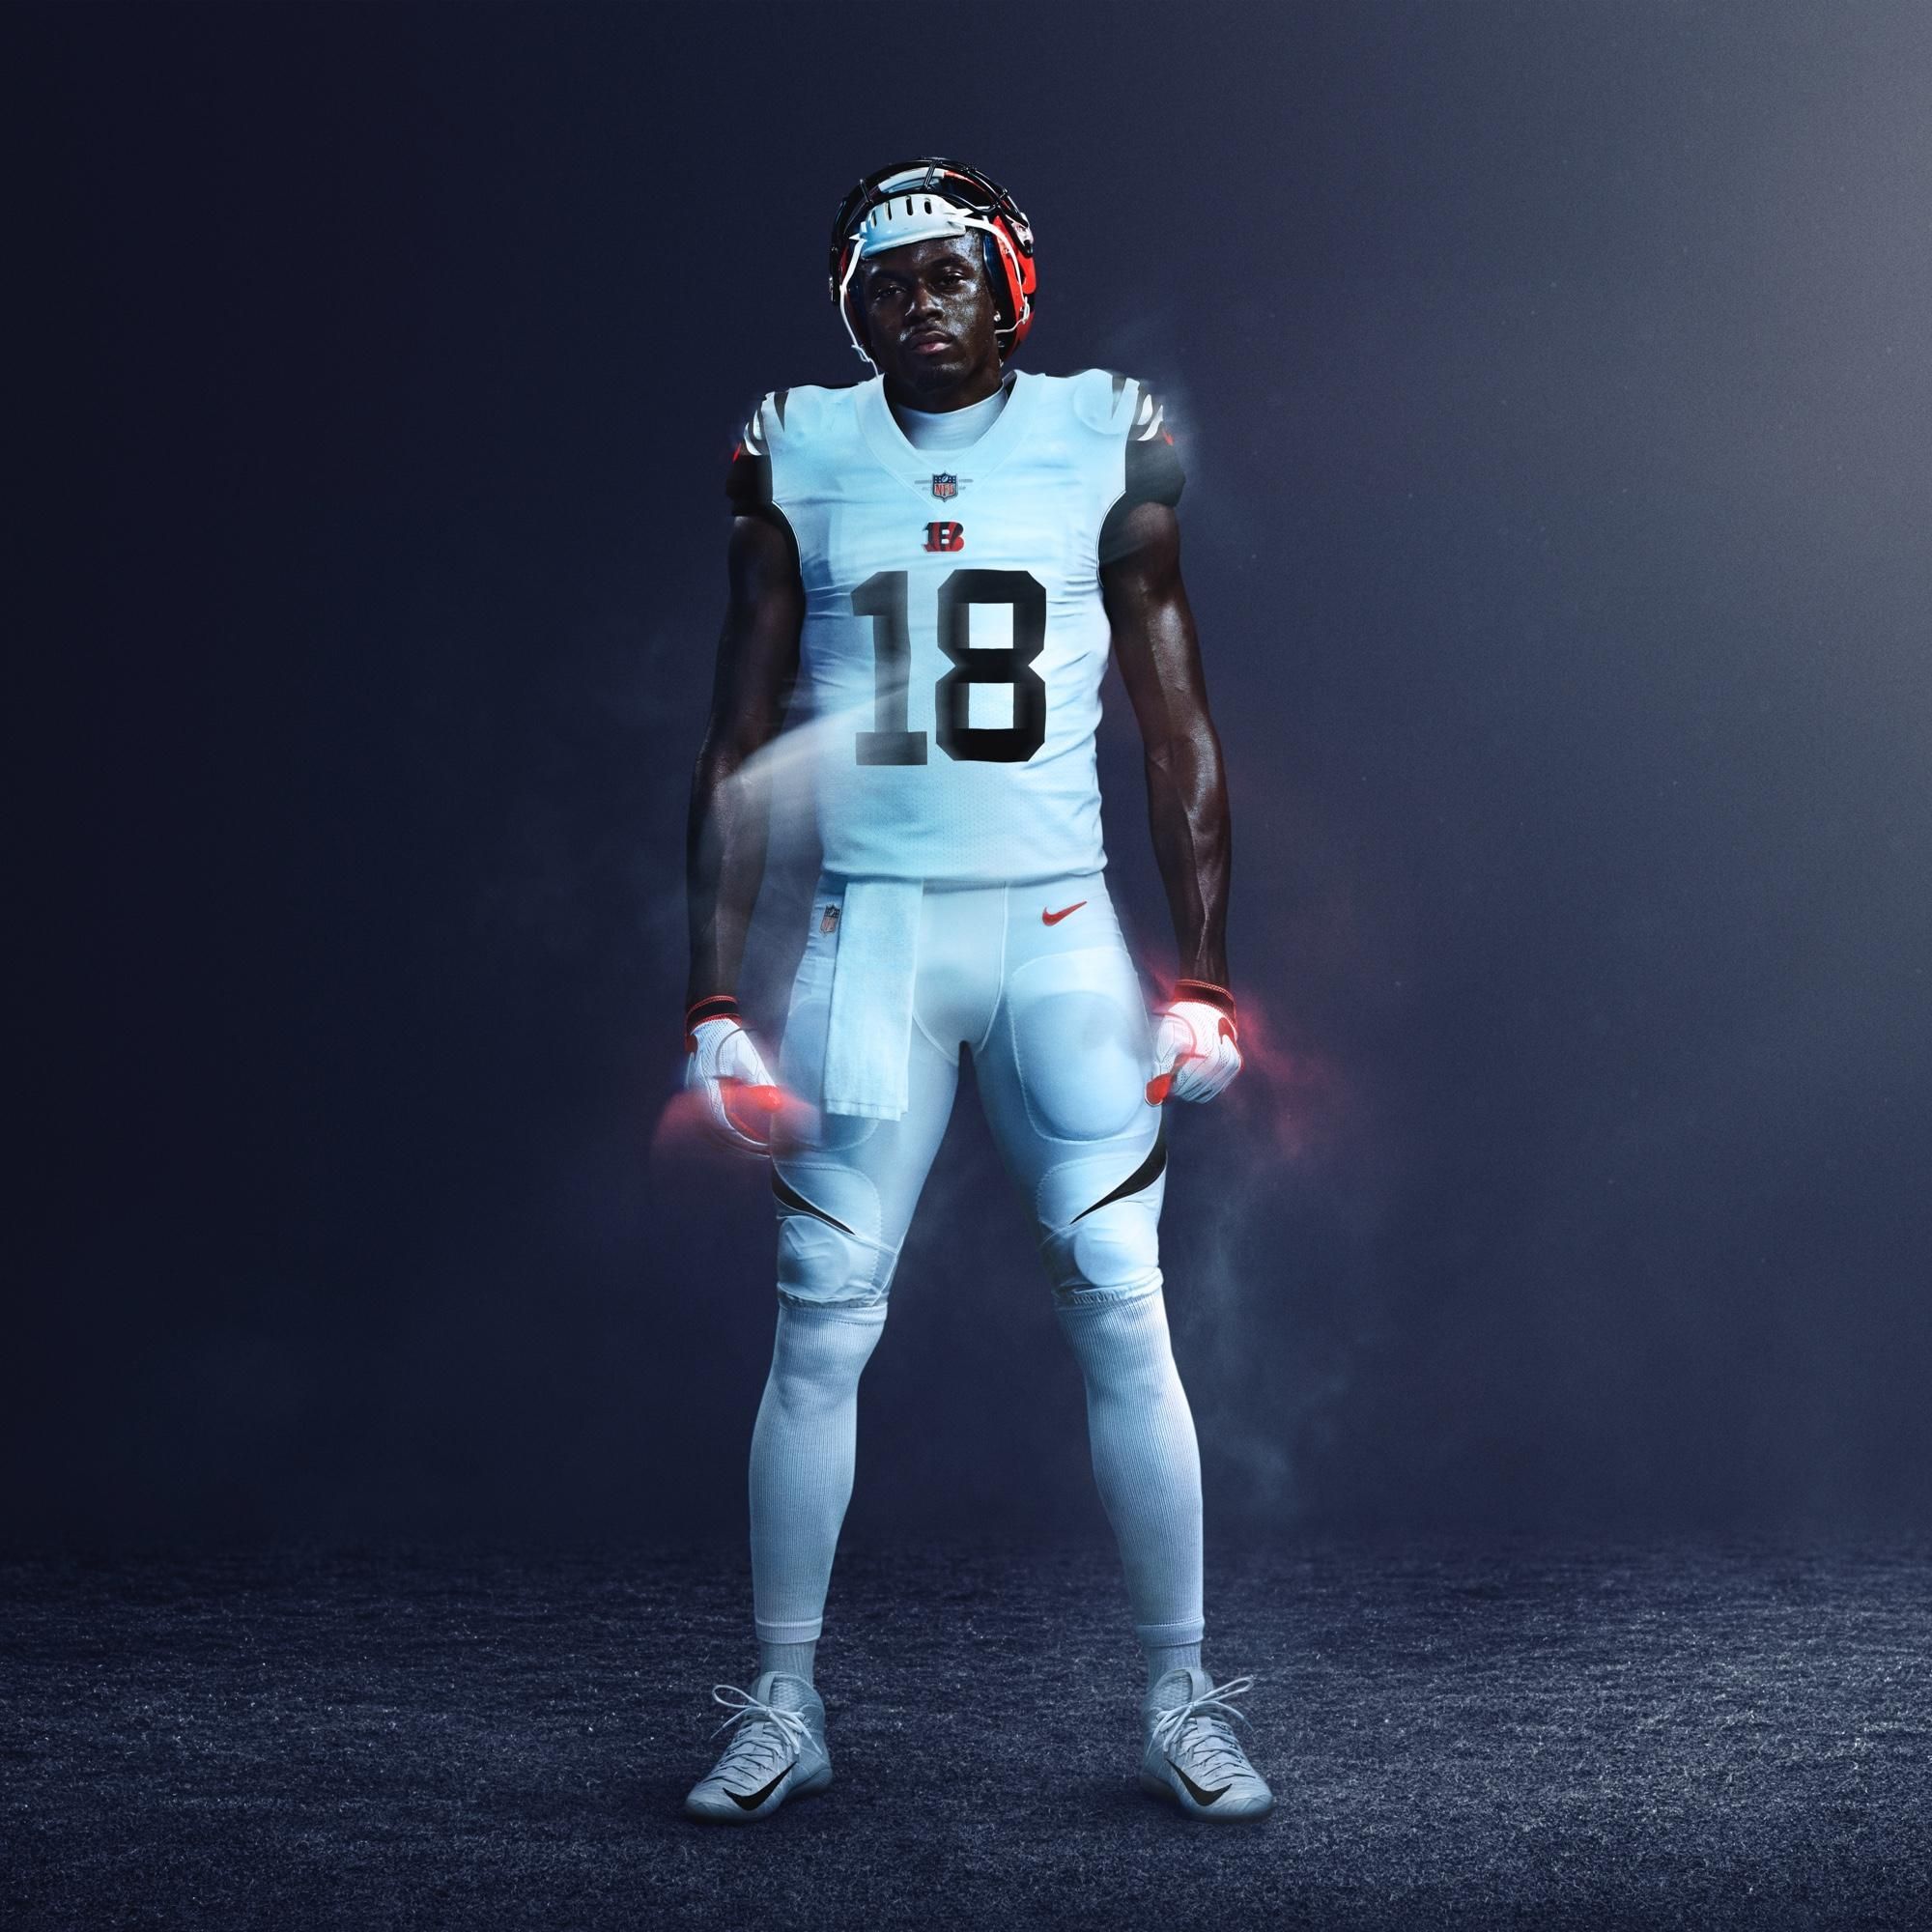 A Look At All 32 NFL Color Rush Uniforms. Nfl color rush uniforms, Color rush uniforms, Color rush nfl